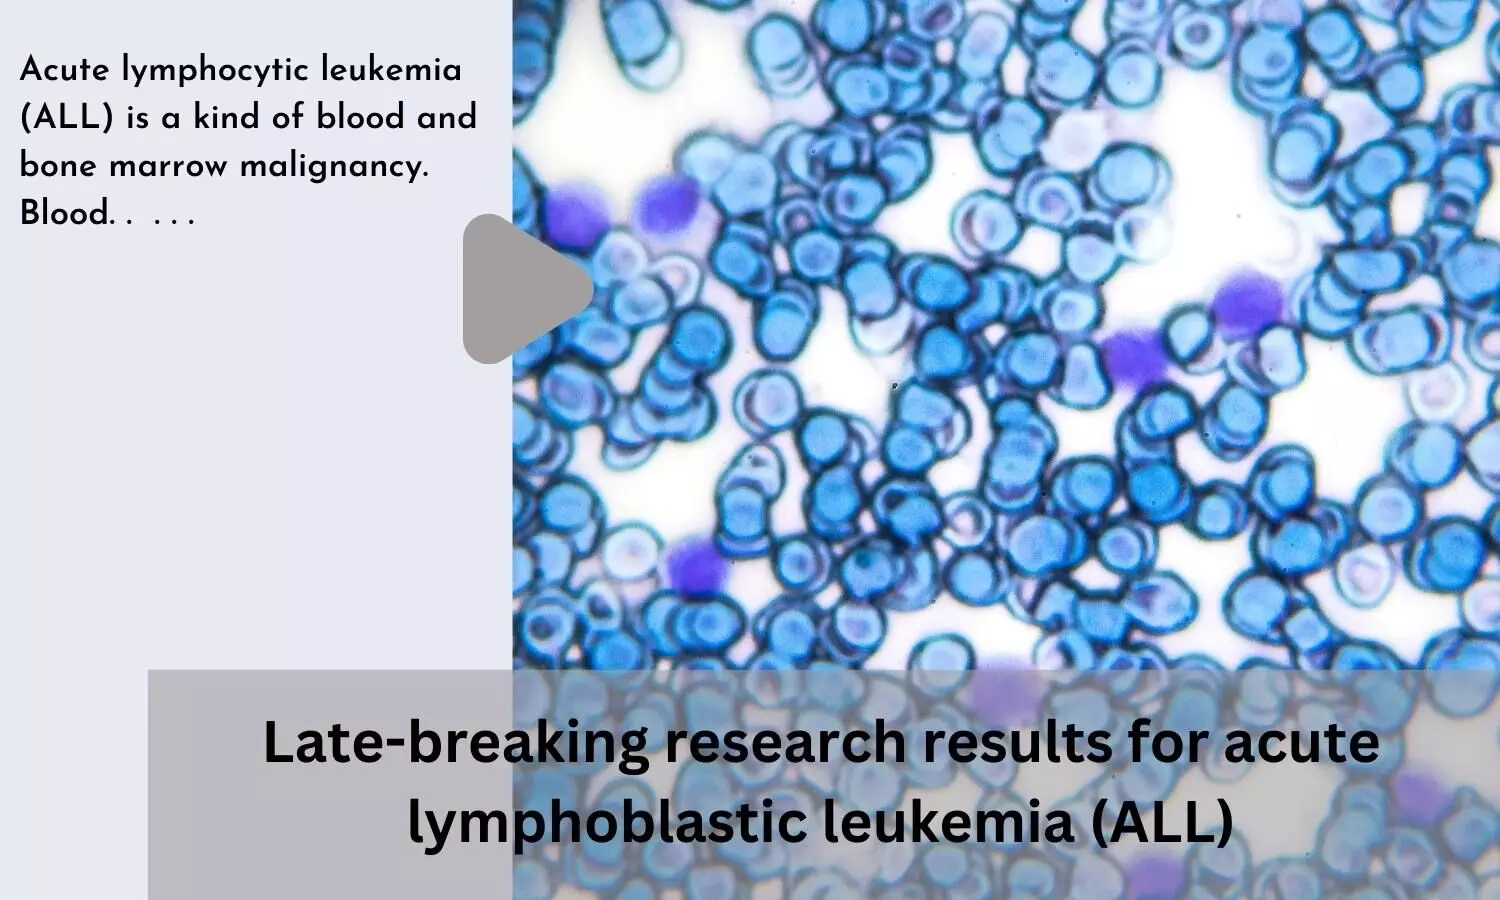 Late-breaking research results for acute lymphoblastic leukemia (ALL)